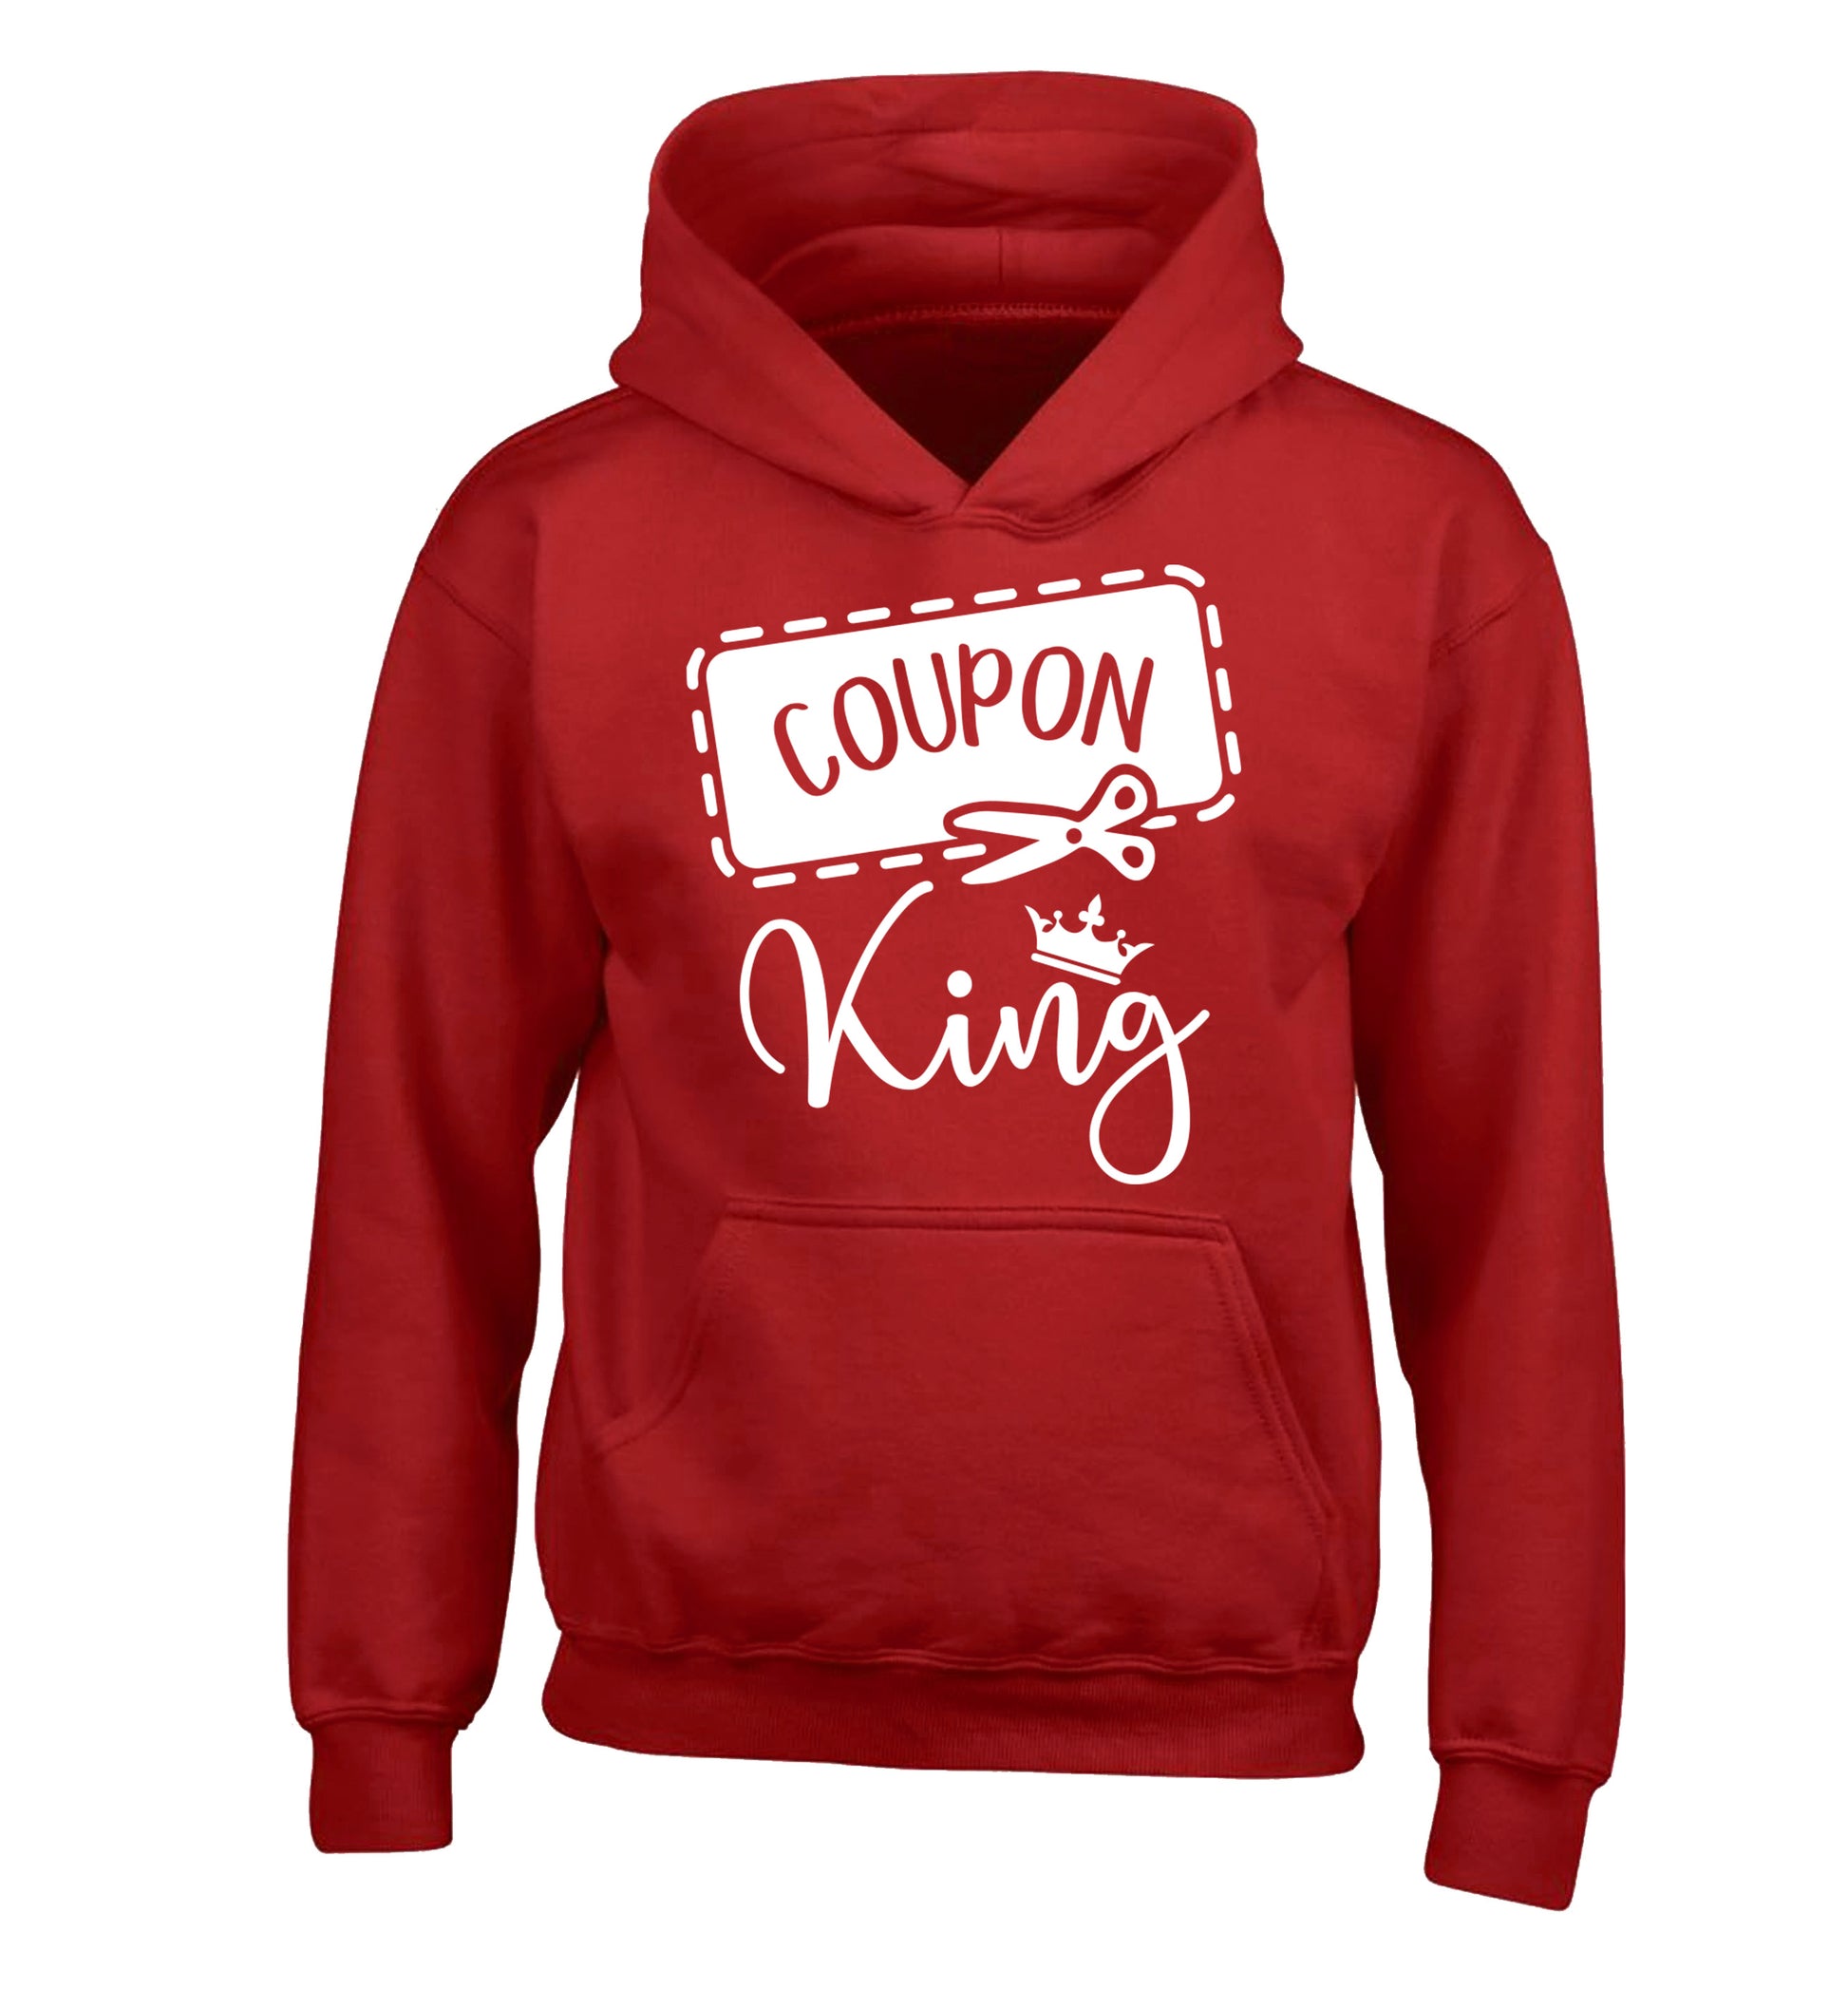 Coupon King children's red hoodie 12-13 Years